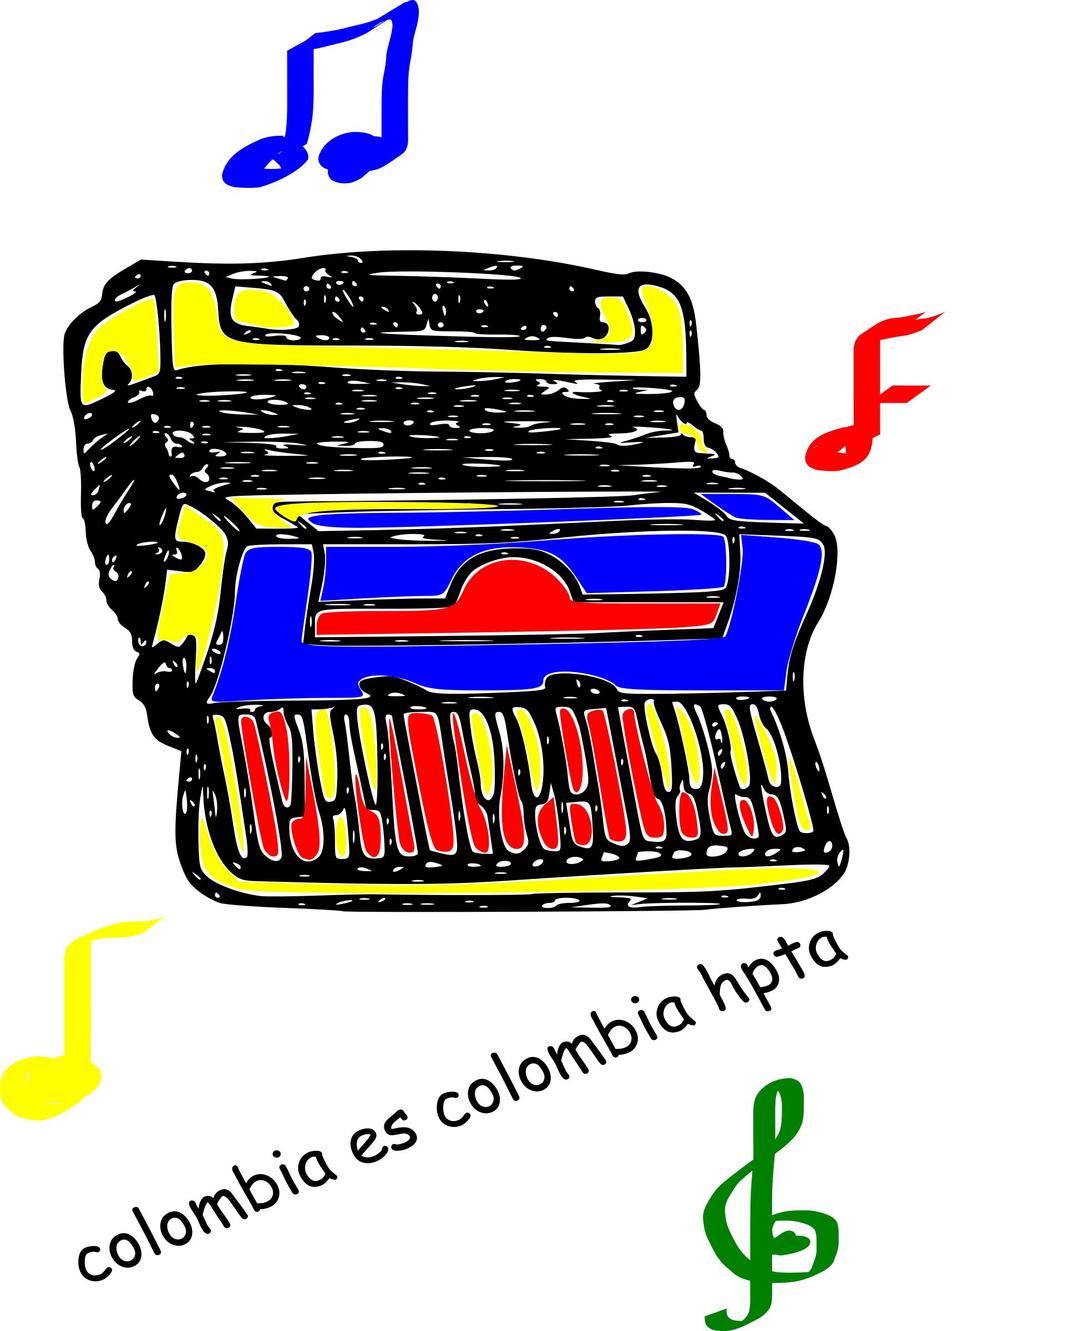 acordion colombiano png transparent